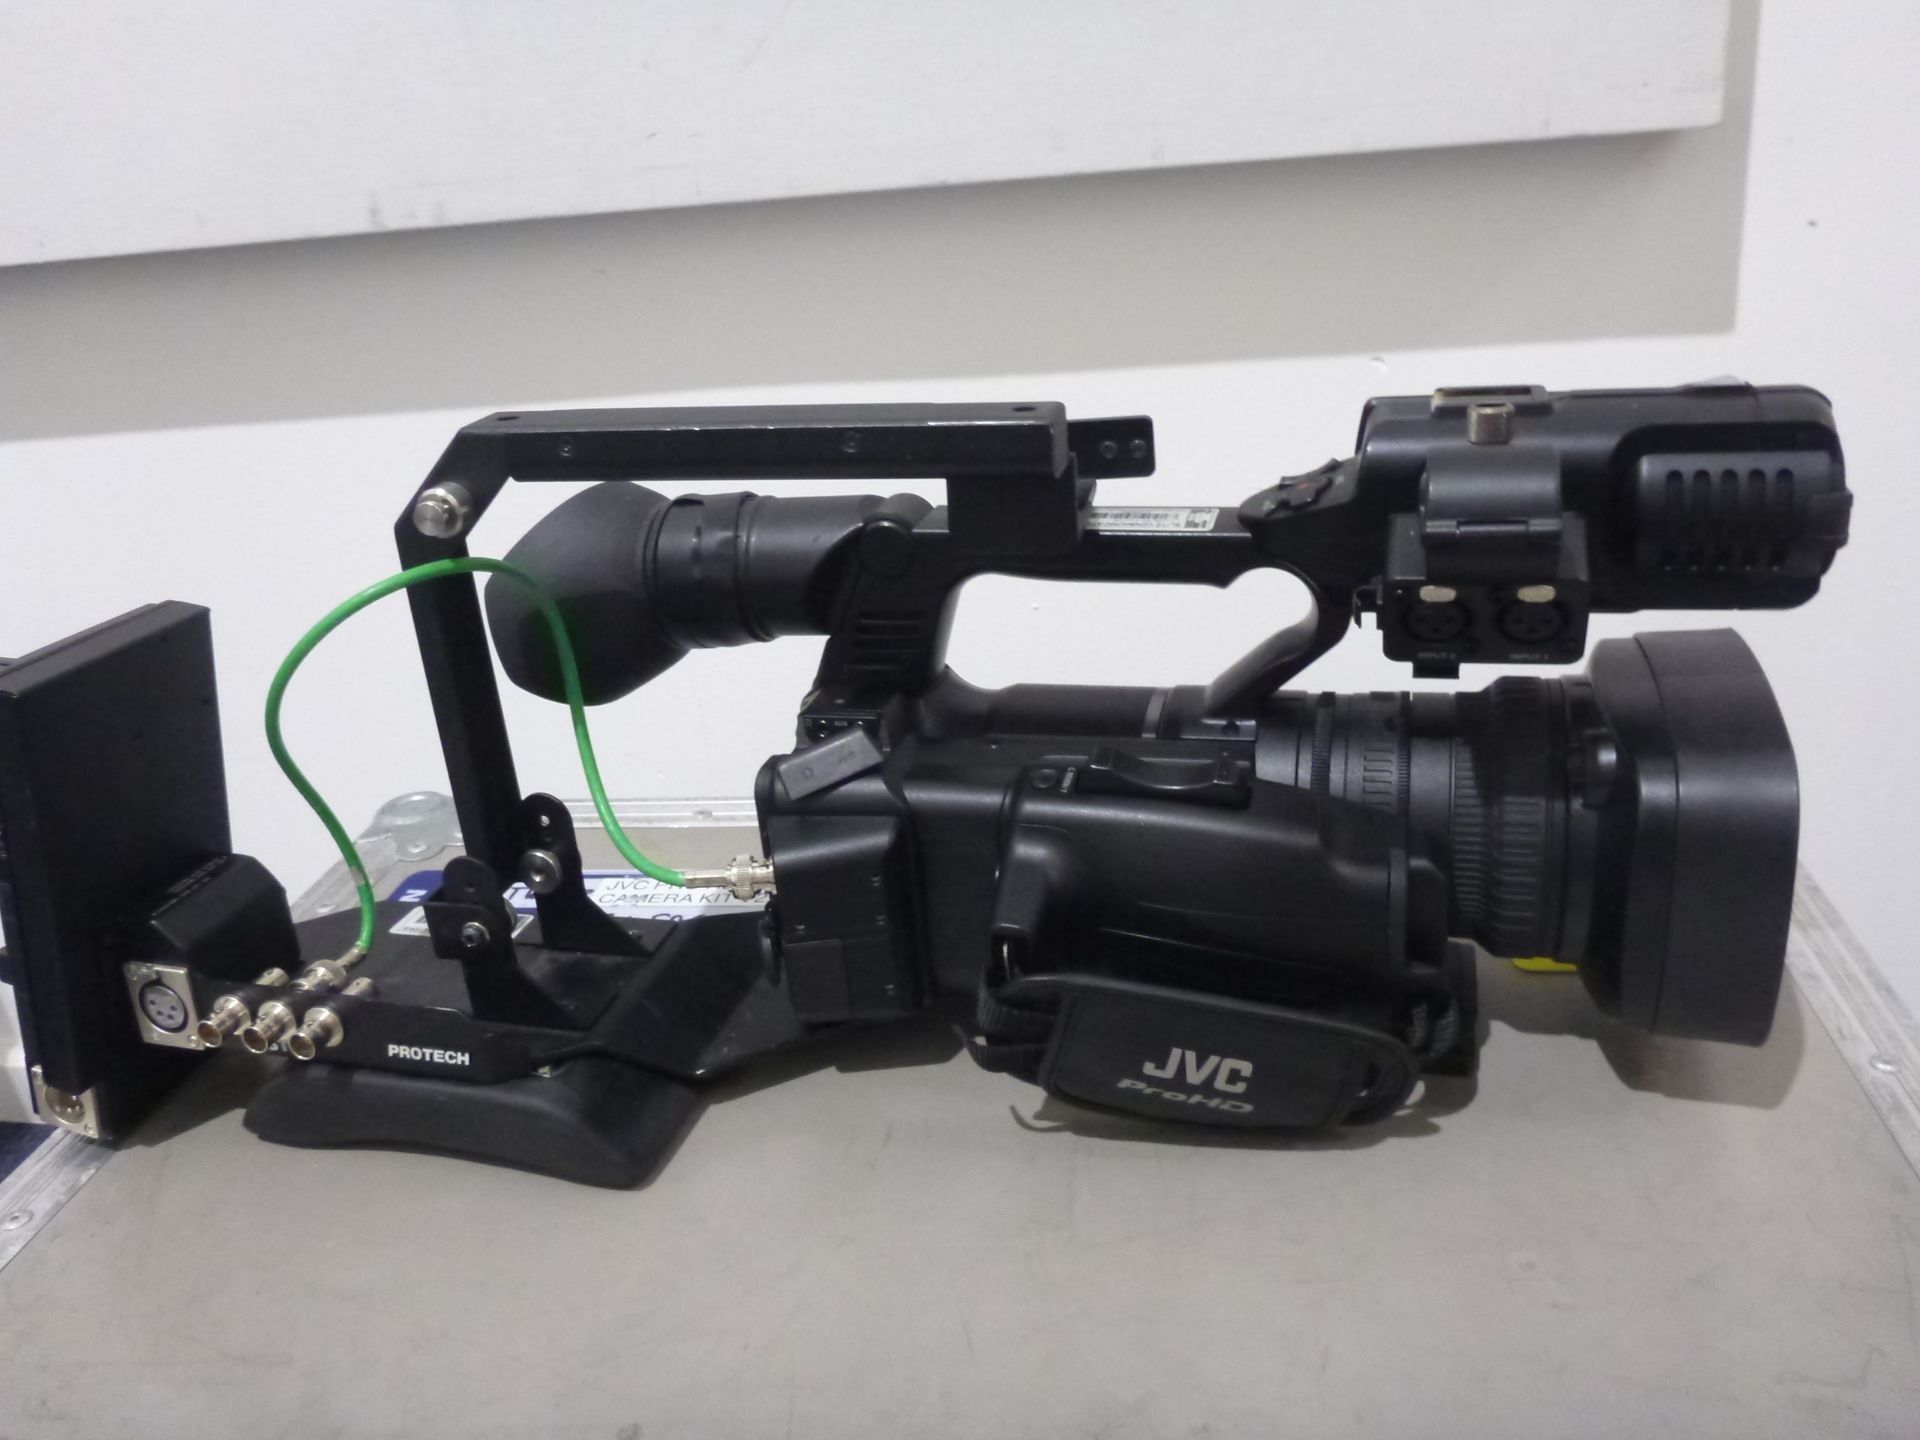 JVC HD Pro Camcorder, Model GY-HM650, S/N 17040466, In flight case with various accessories like - Image 4 of 16